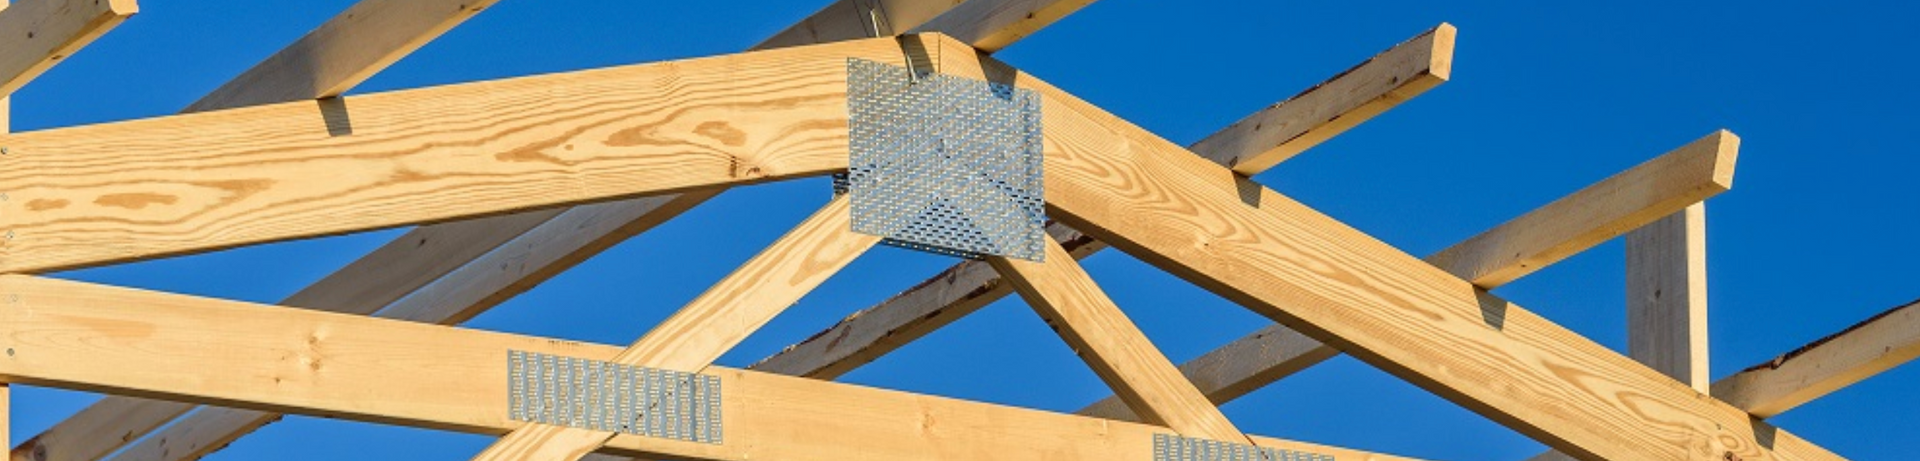 roof truss third nail important